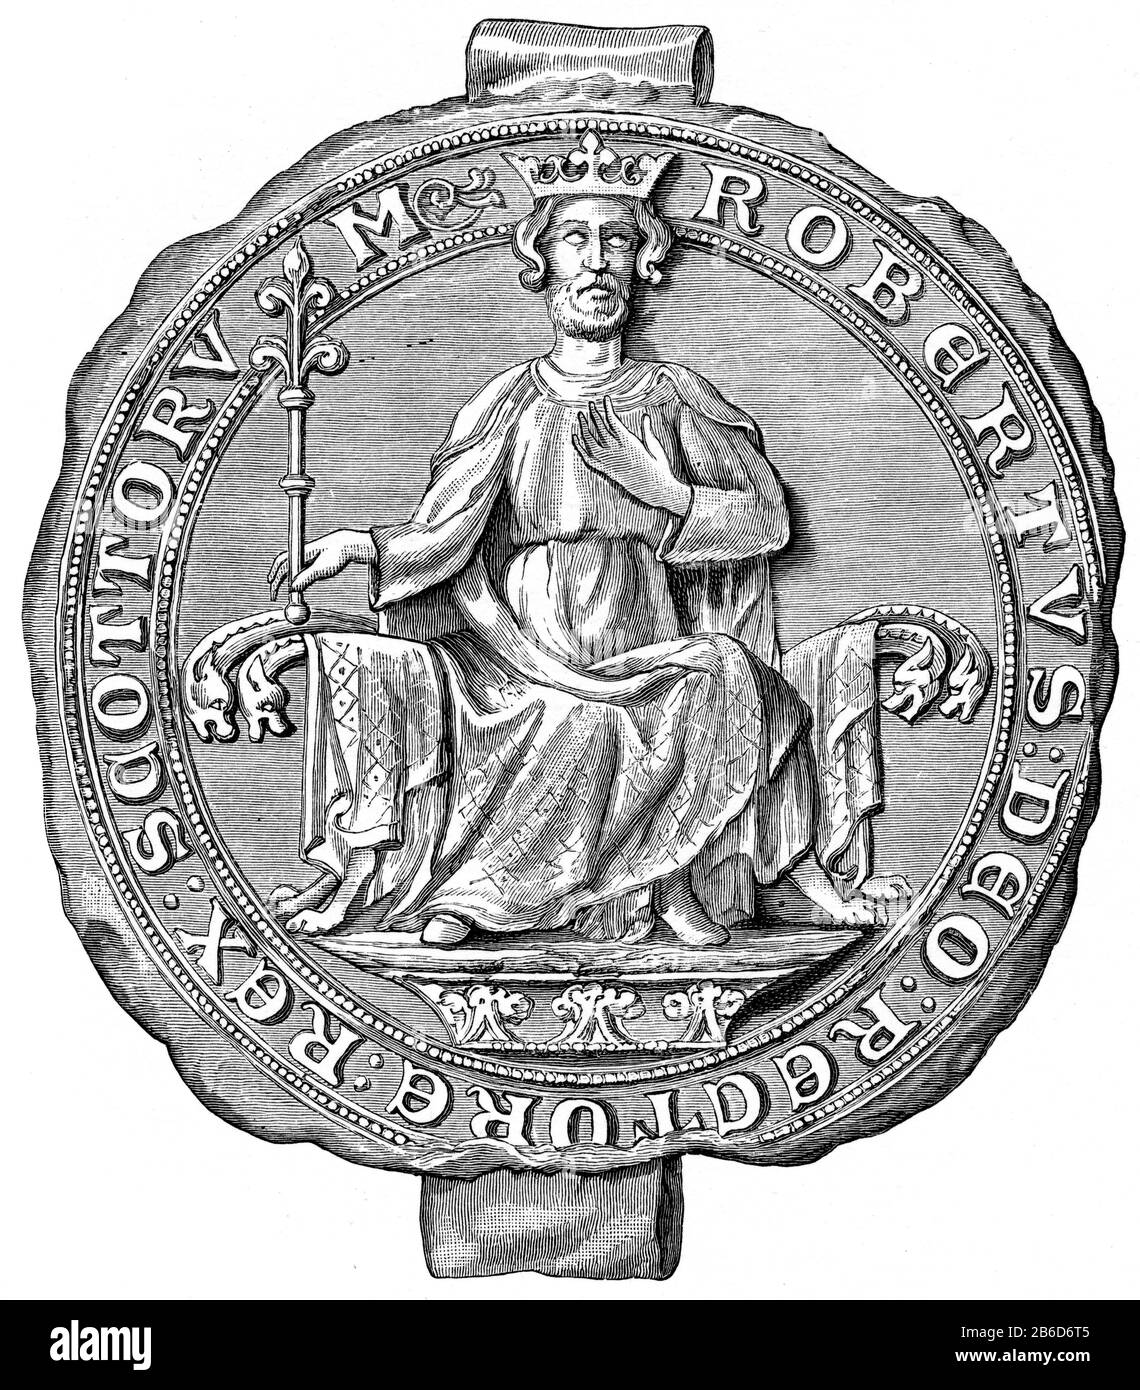 Seal of Robert Bruce, King of Scots, 14th century. King Robert I (1274-1329), popularly known as Robert the Bruce, was King of Scots from 1306 until his death in 1329. Robert I led Scotland during the Wars of Scottish Independence. Stock Photo